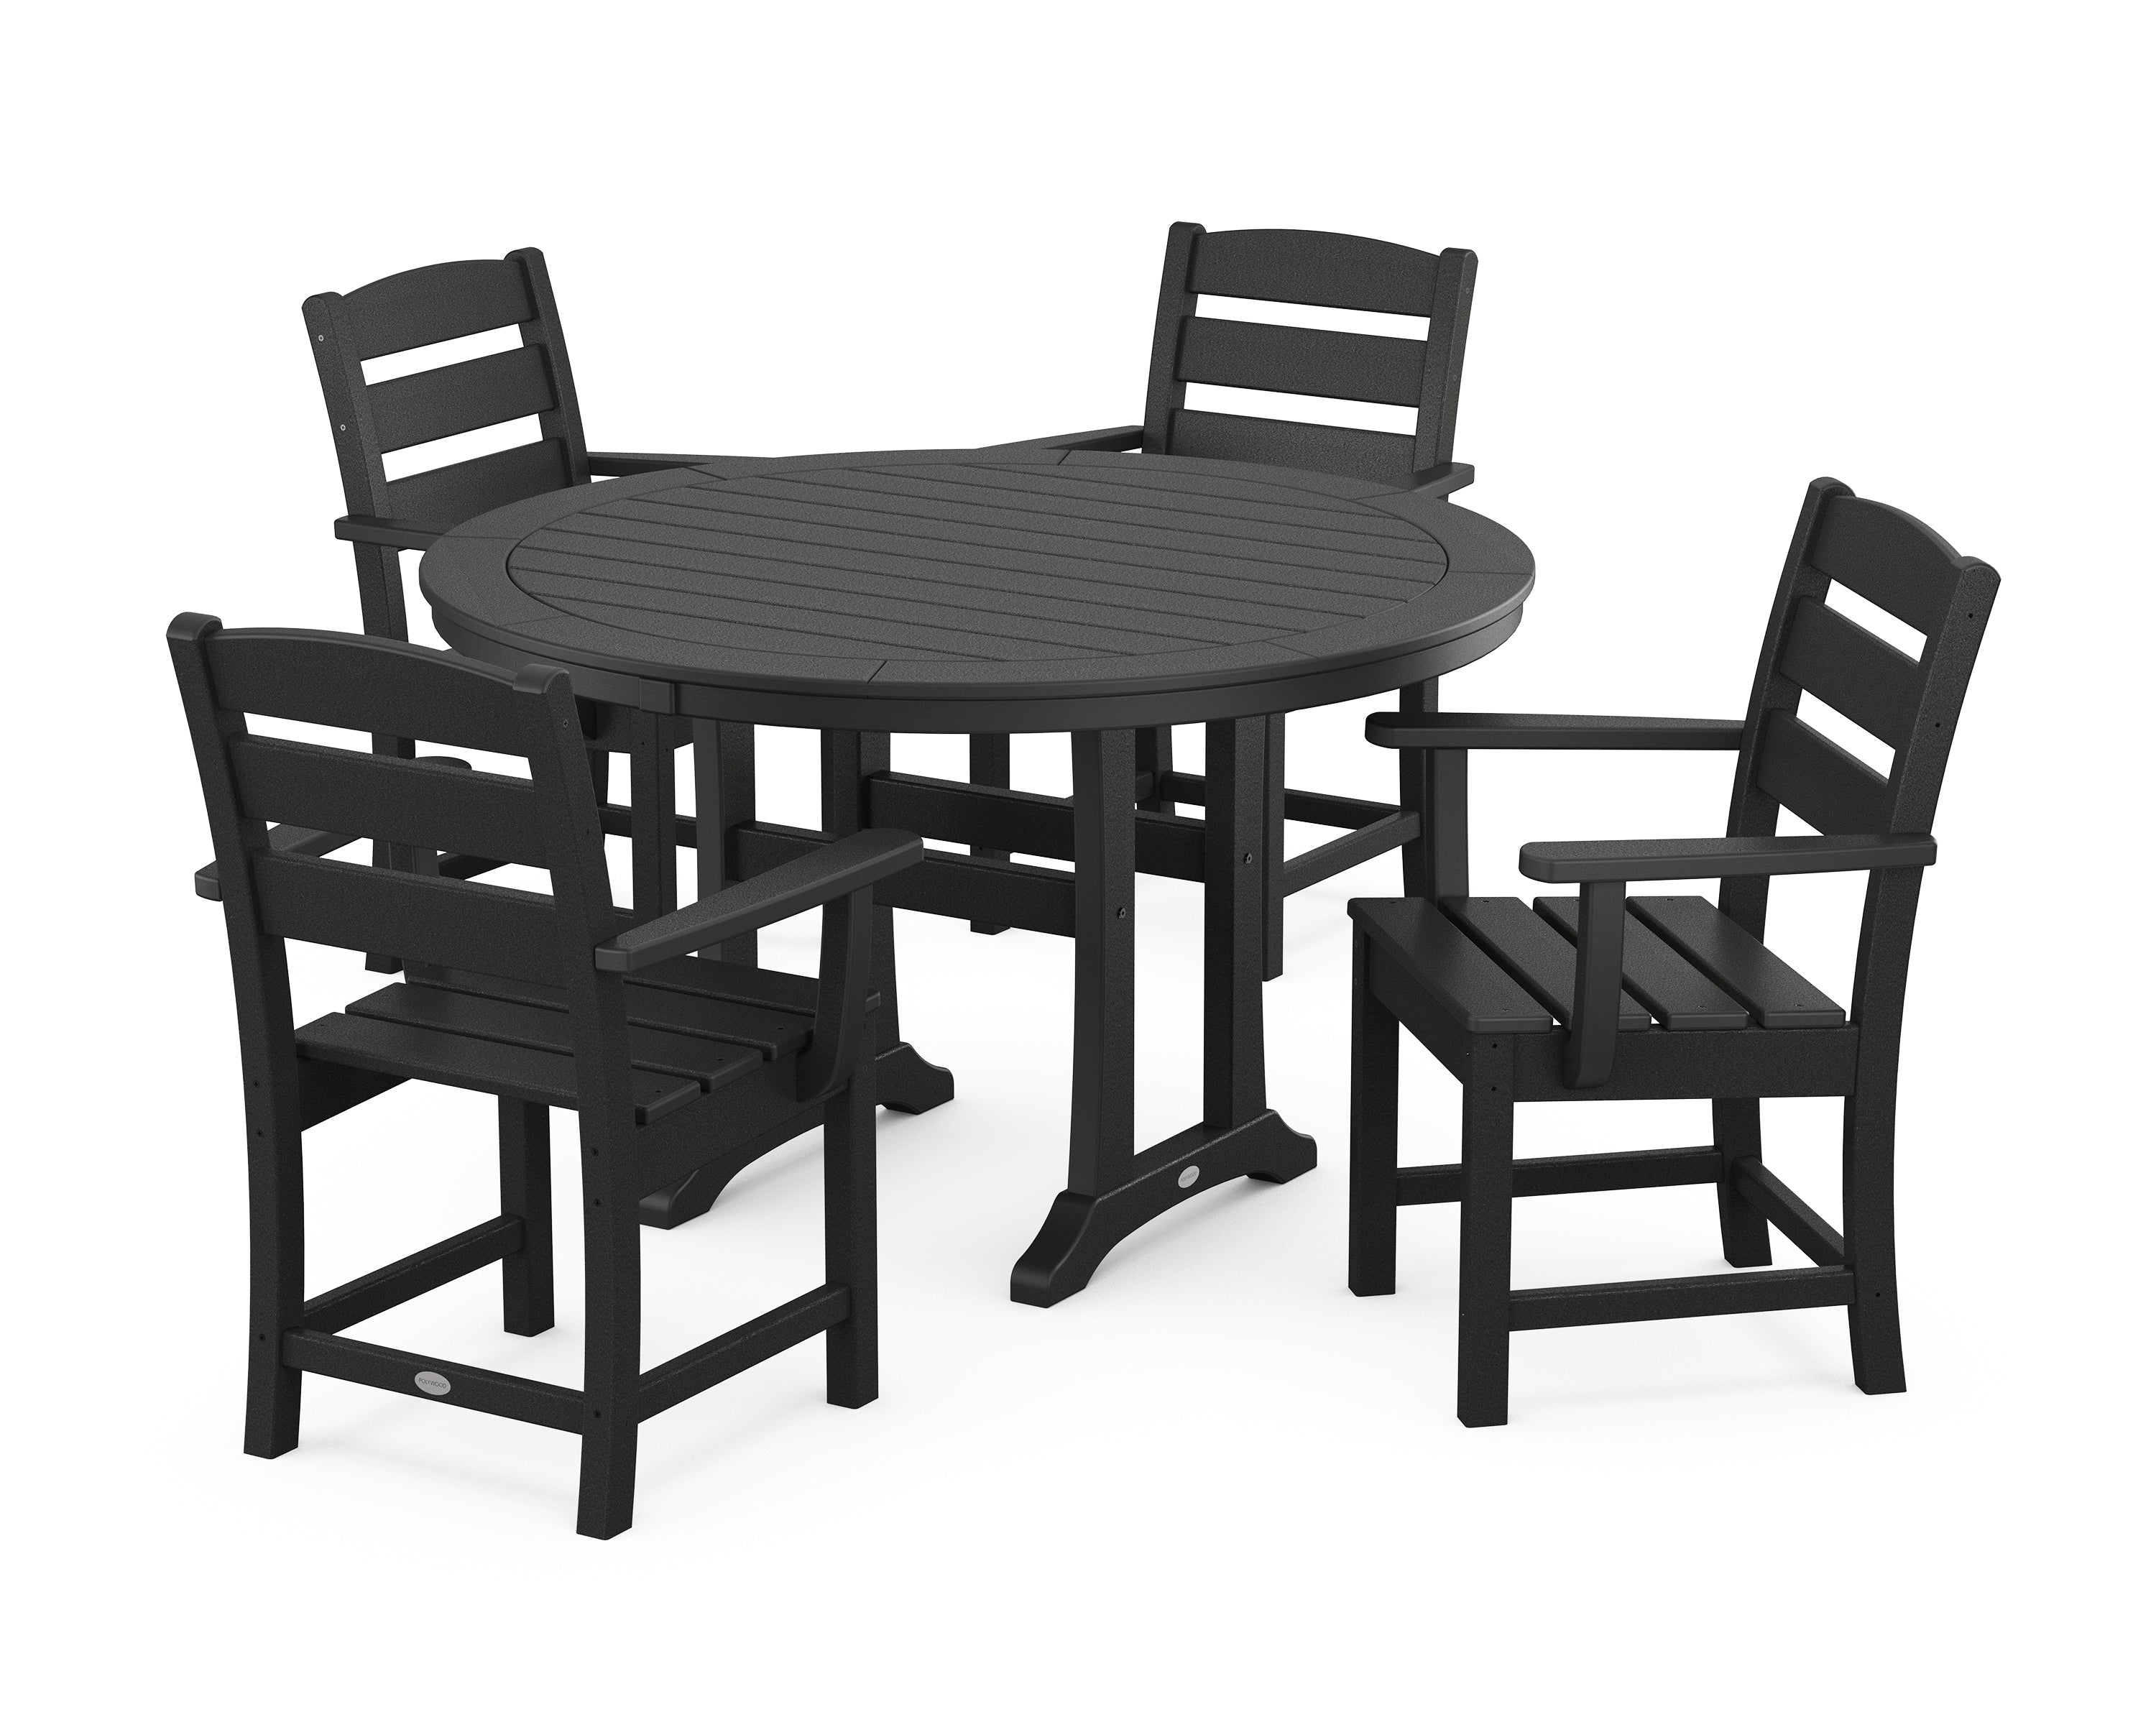 POLYWOOD® Lakeside 5-Piece Round Dining Set with Trestle Legs in Black